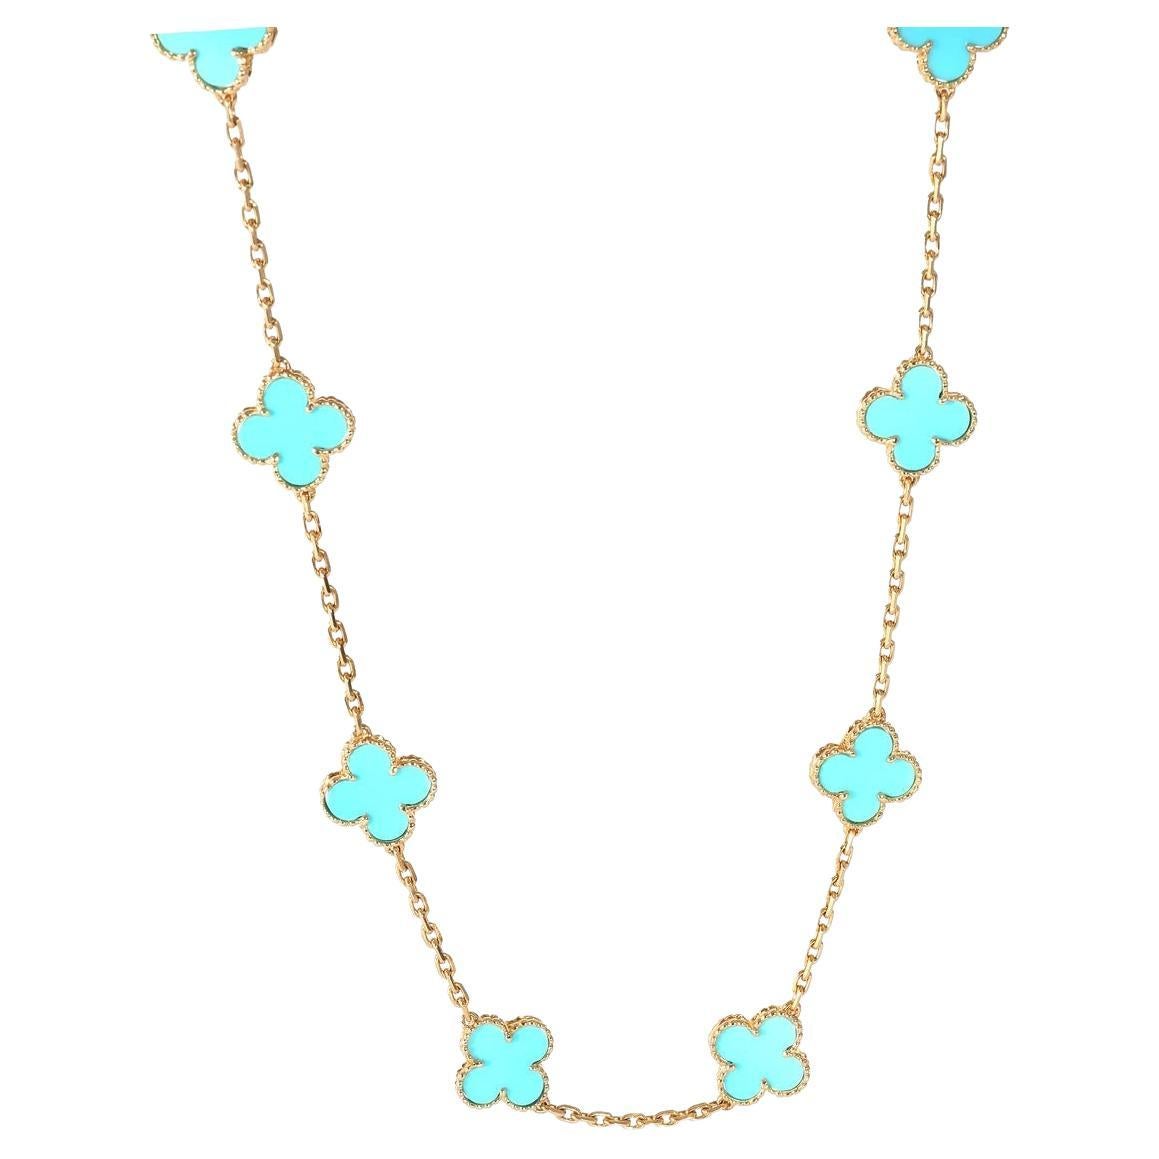 This classic vintage Van Cleef & Arpels necklace is crafted in 18k yellow gold and features 20 lucky clover motifs inlaid with turquoise in round bead settings. Made in France. 
Comes with original case serial number and papers
Clasp in 18K yellow